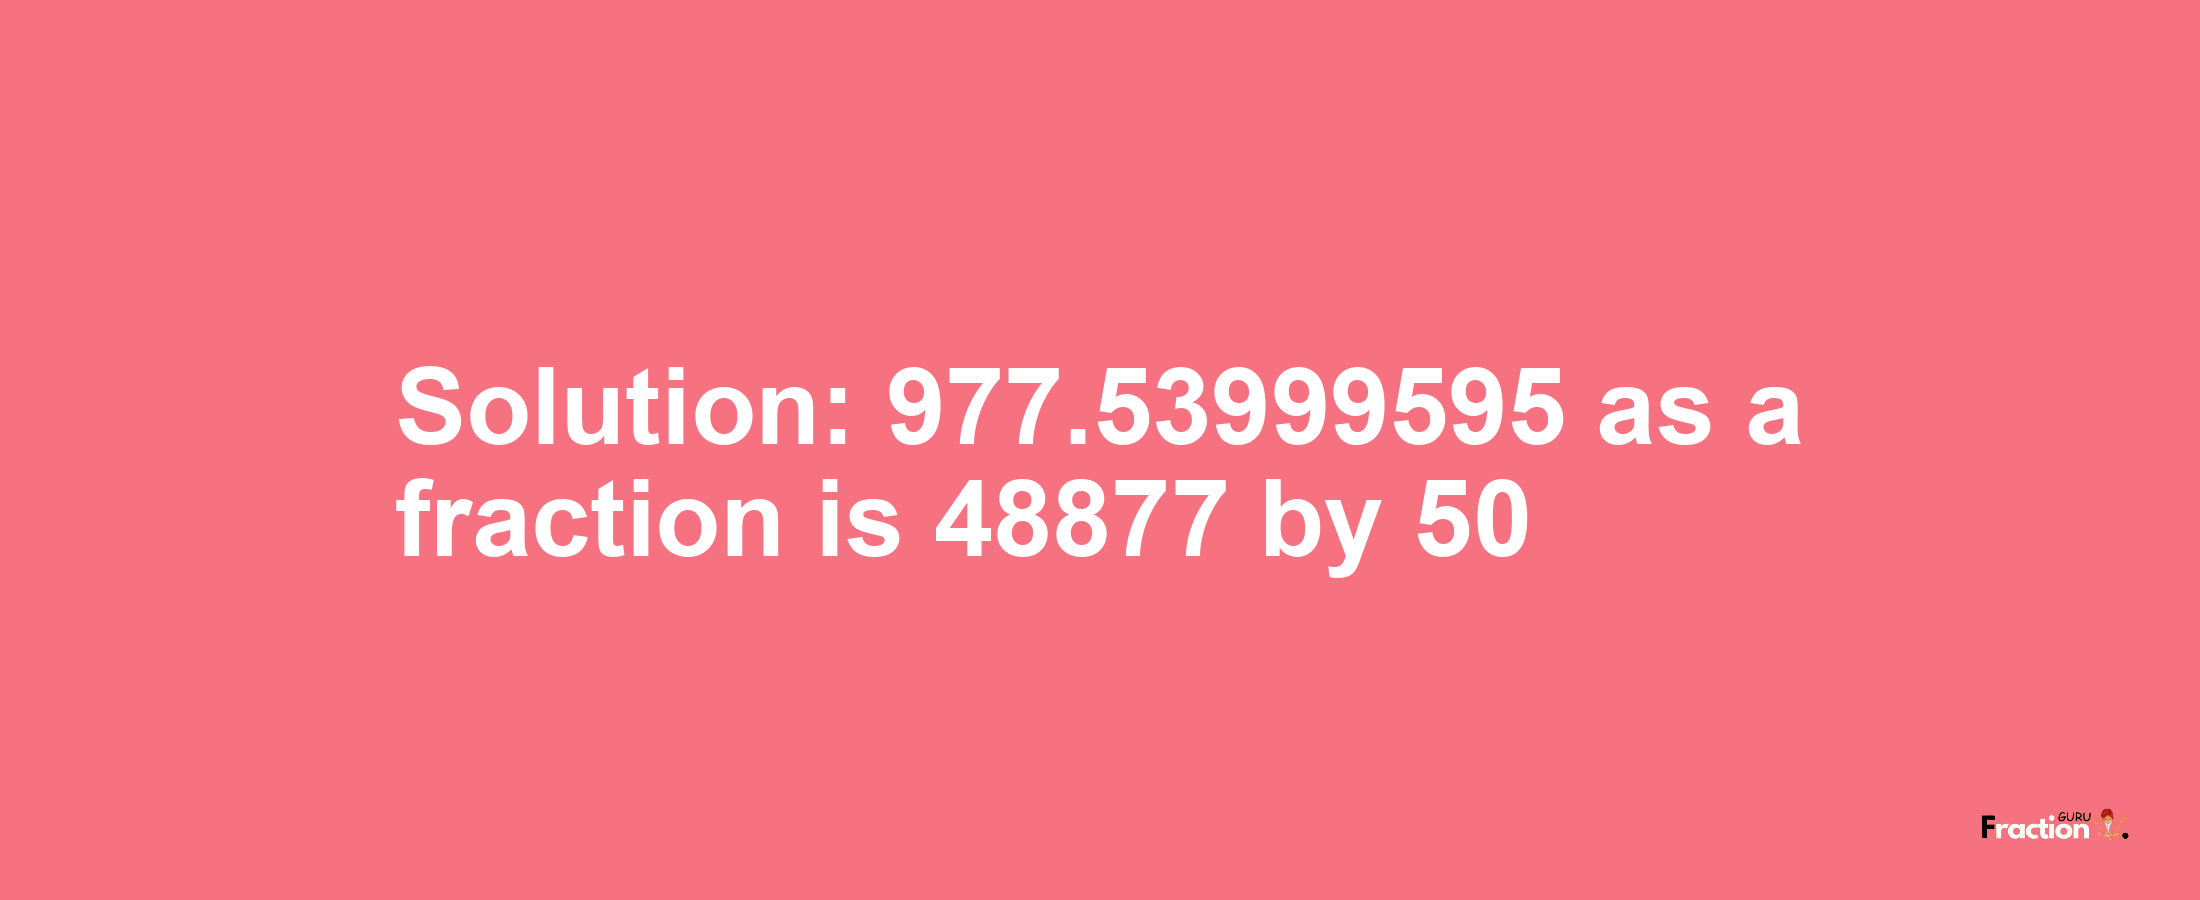 Solution:977.53999595 as a fraction is 48877/50